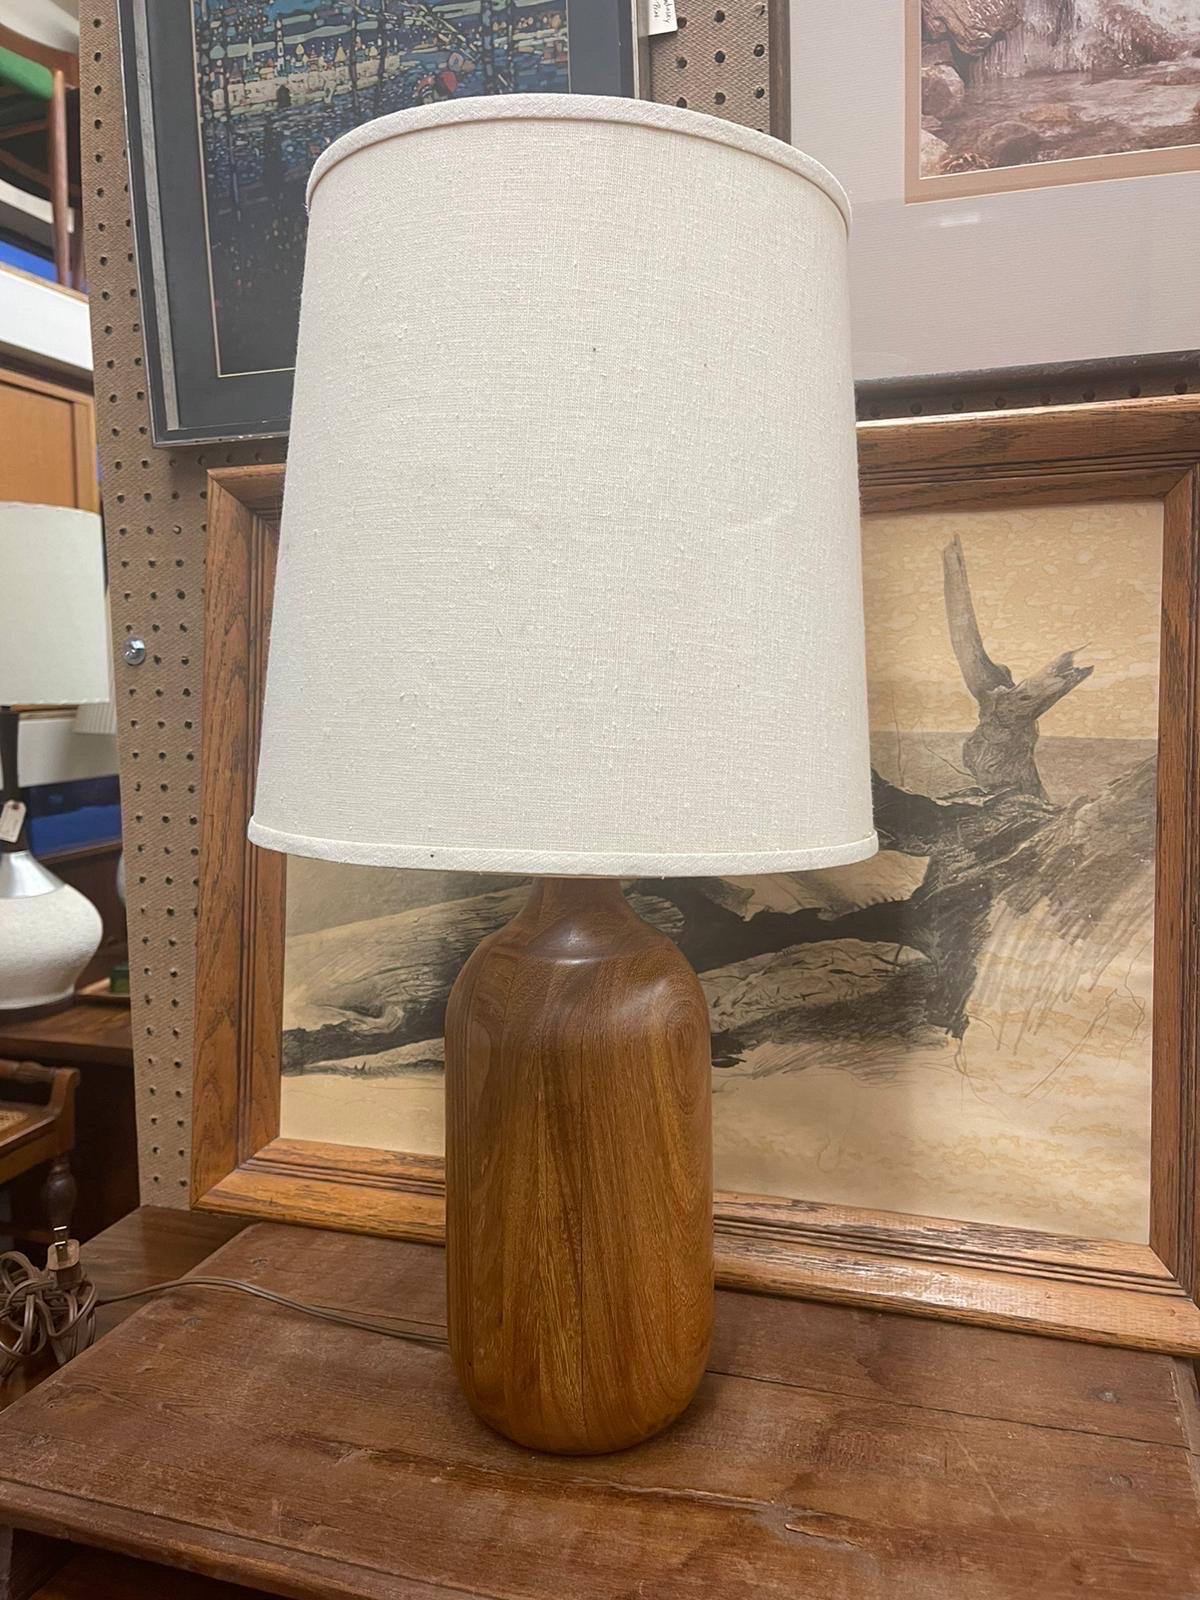 Vintage Table Lamp with WalnutToned Base. Circa 1960s/1970s. Oatmeal Tone Lamp Shade Included. Light Bulb not Included. Possibly Teak. Vintage Condition Consistent with Age as Pictured.

Dimensions. Base 6 Diameter; 24 H
                  Shade. 12